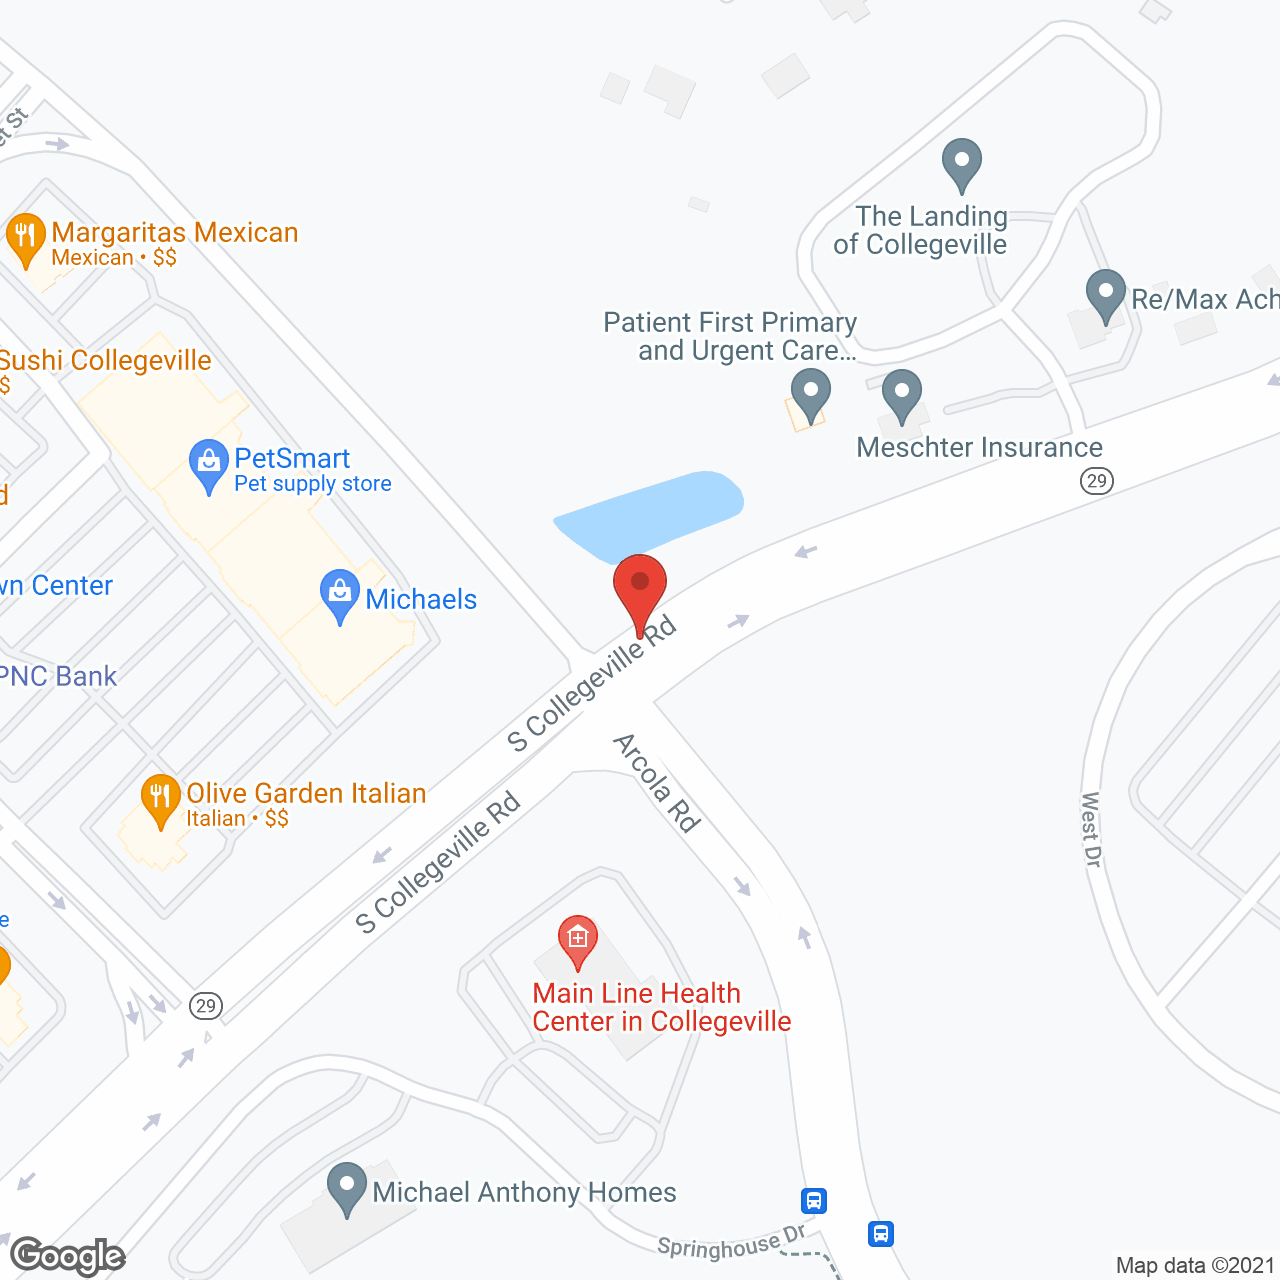 The Landing of Collegeville in google map